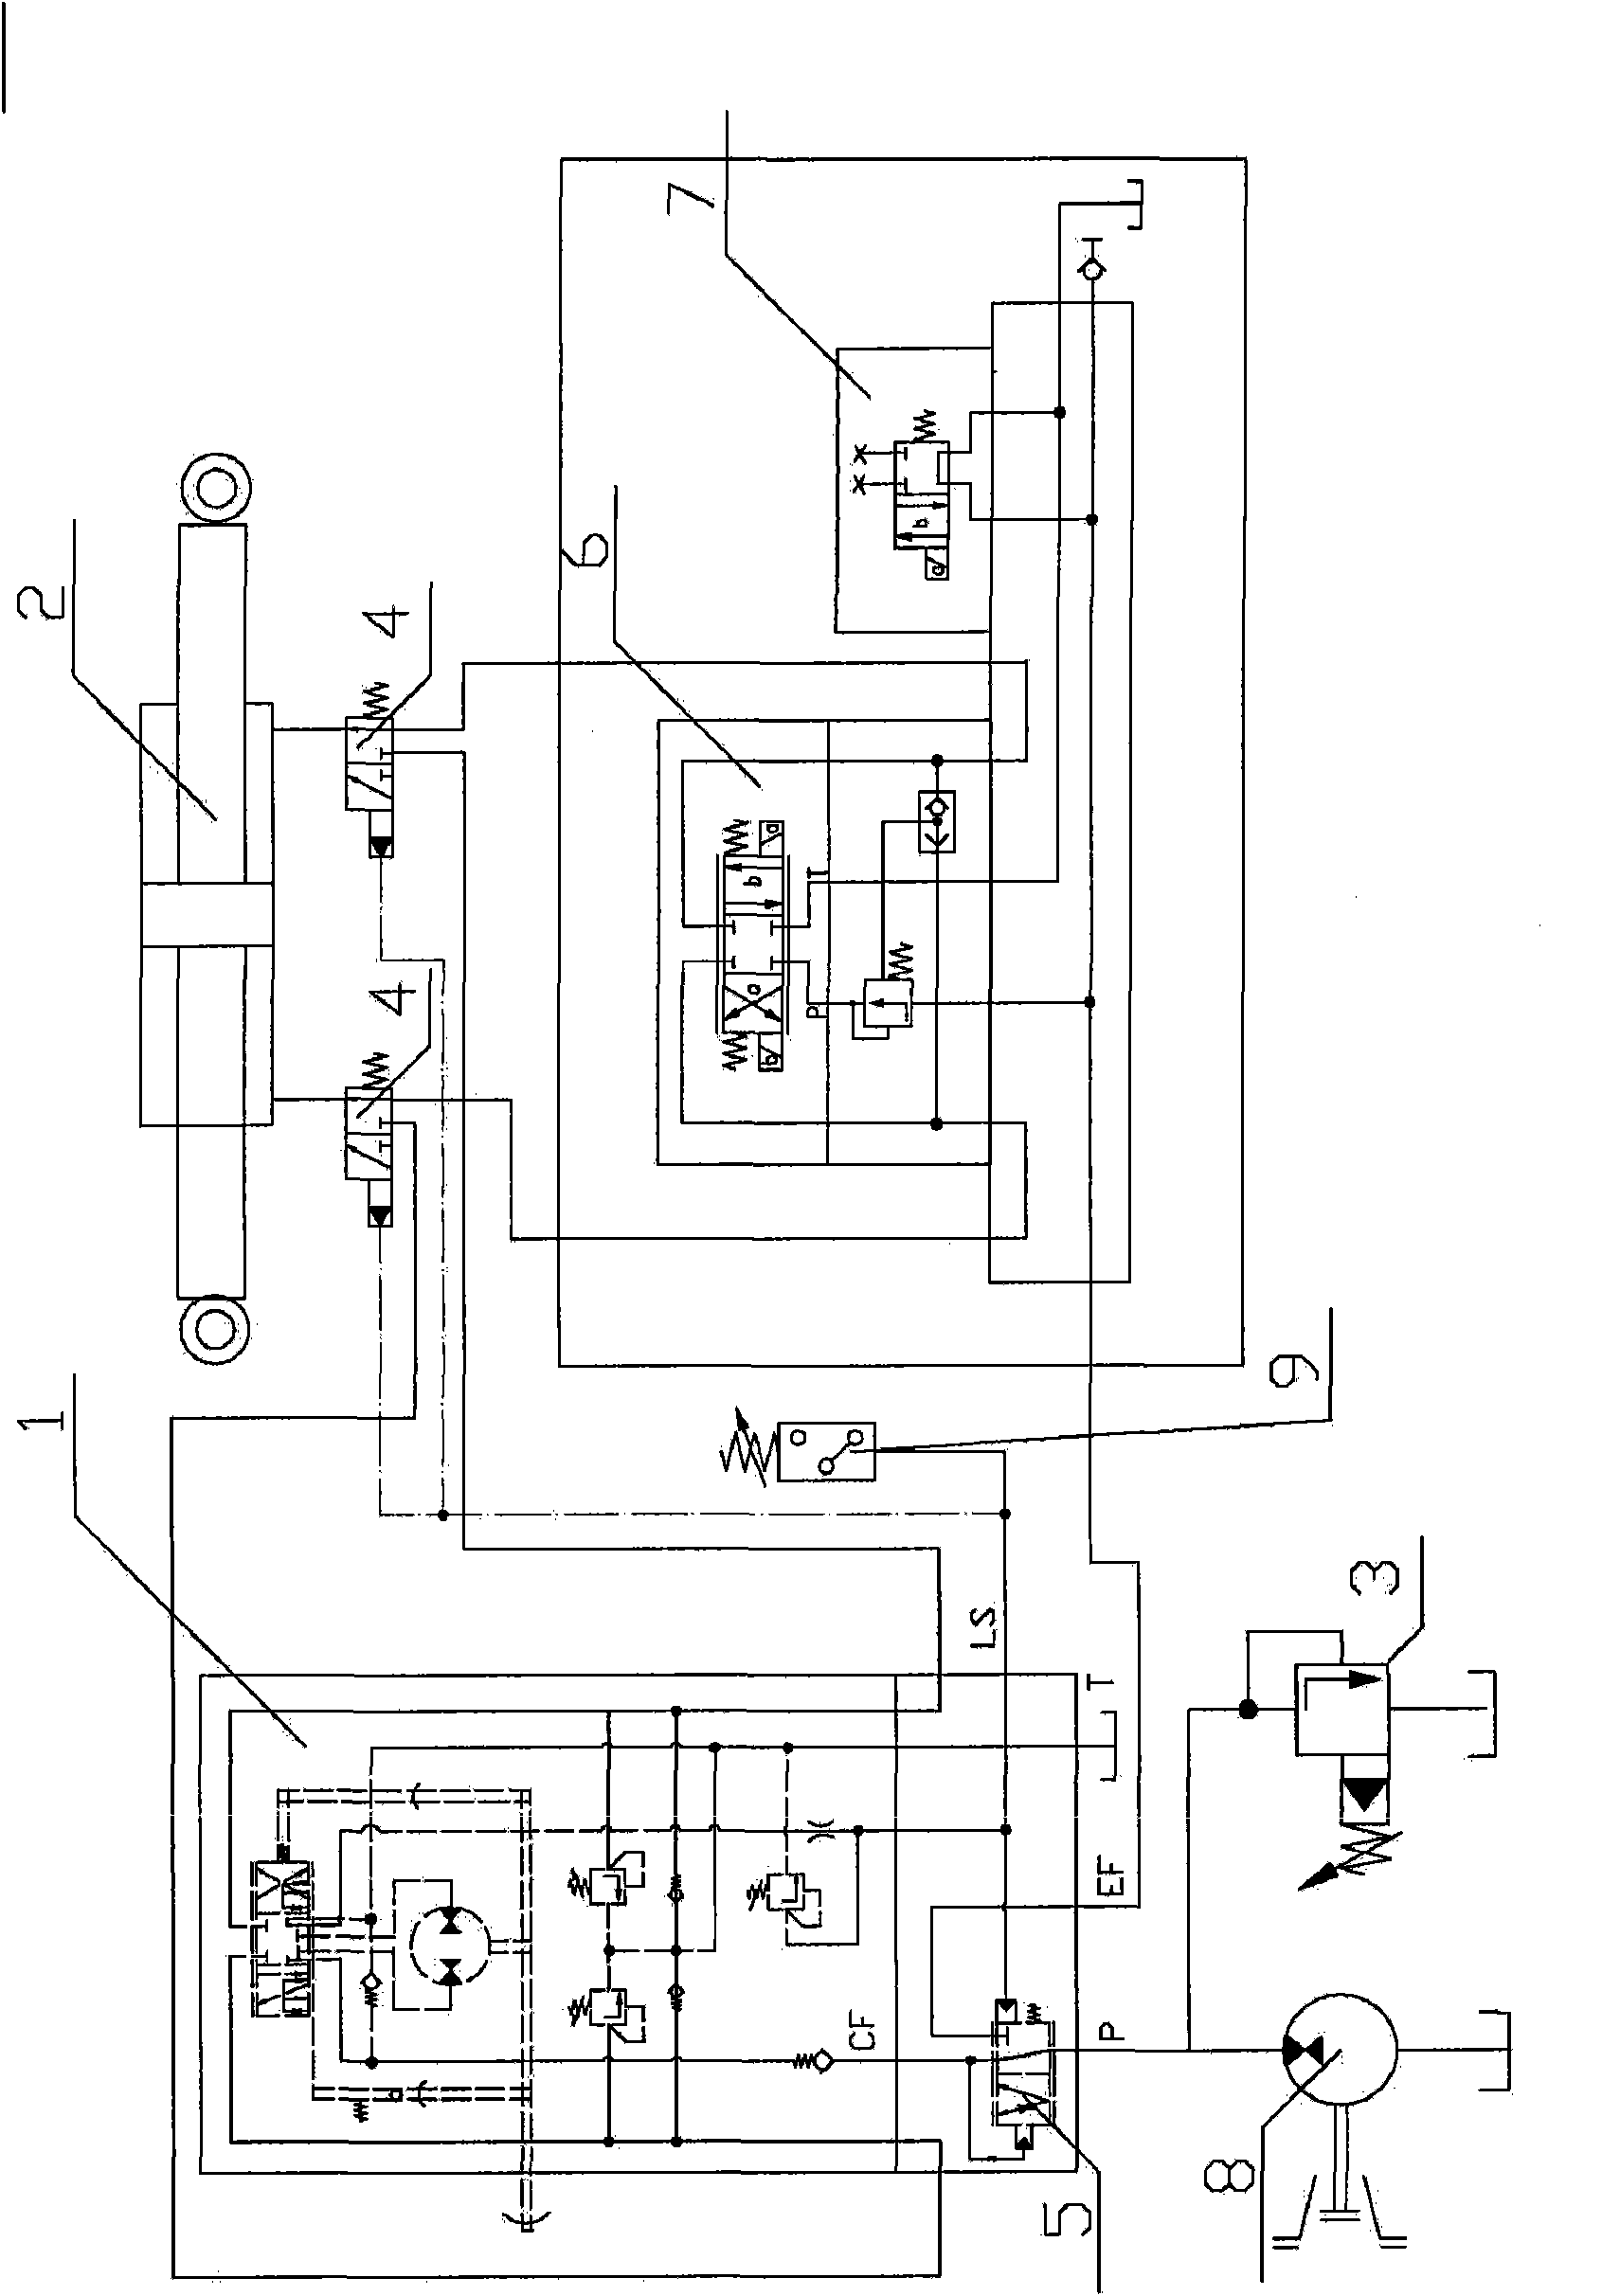 Manual priority tractor self-steering method and device